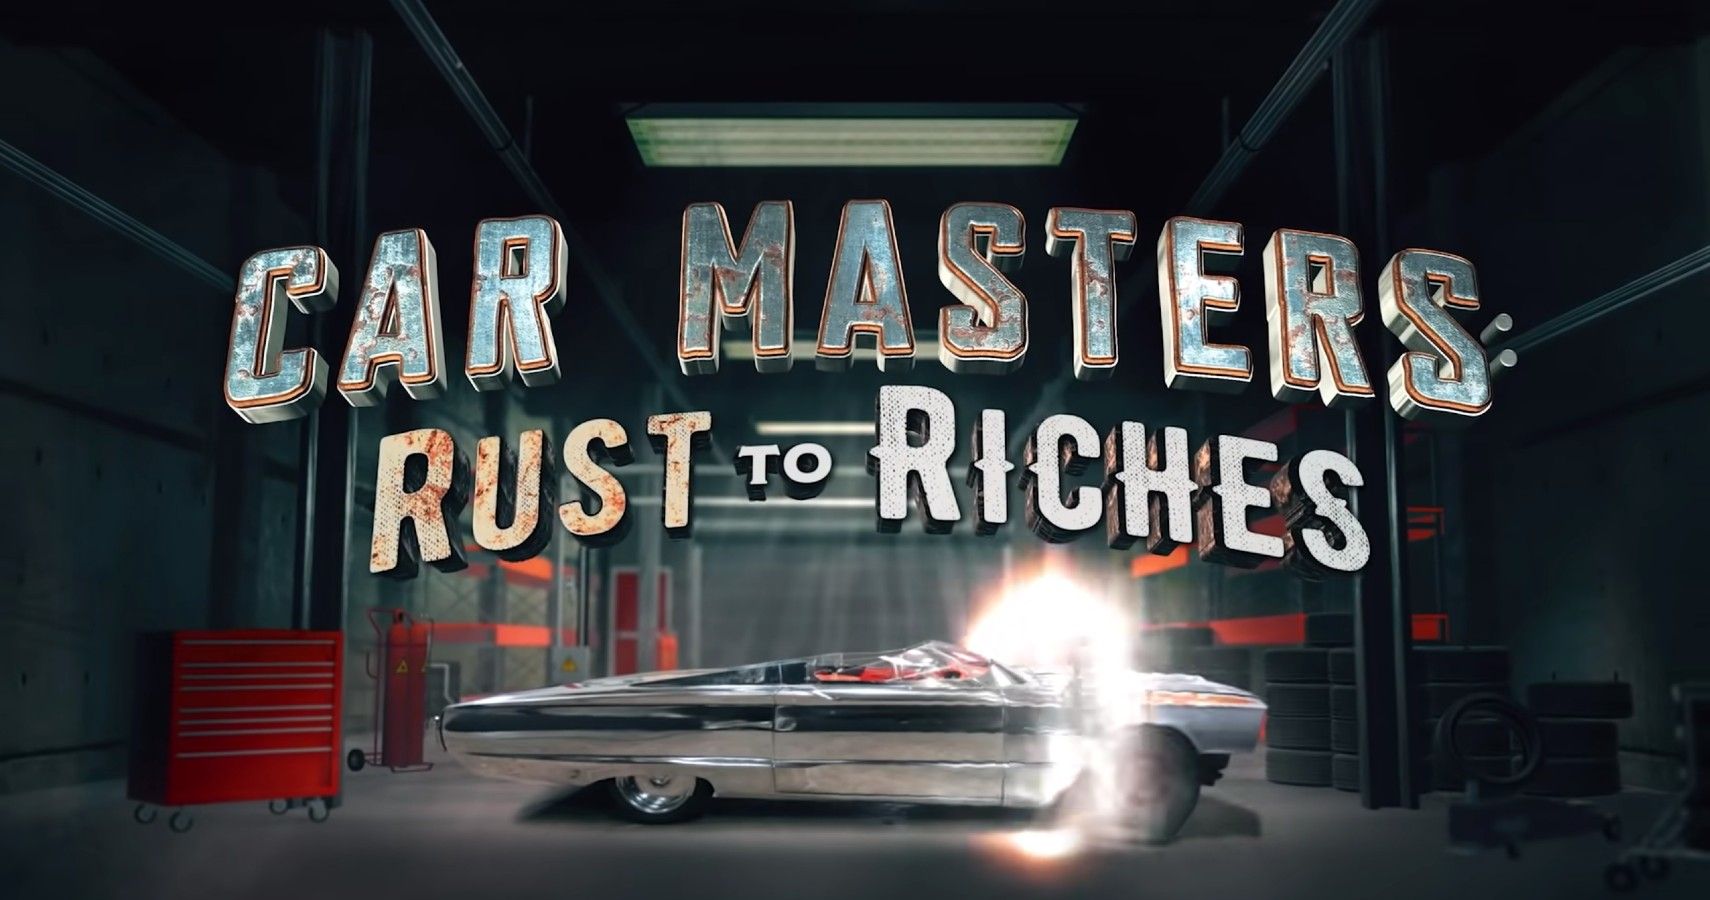 carmasters rust to riches season 3